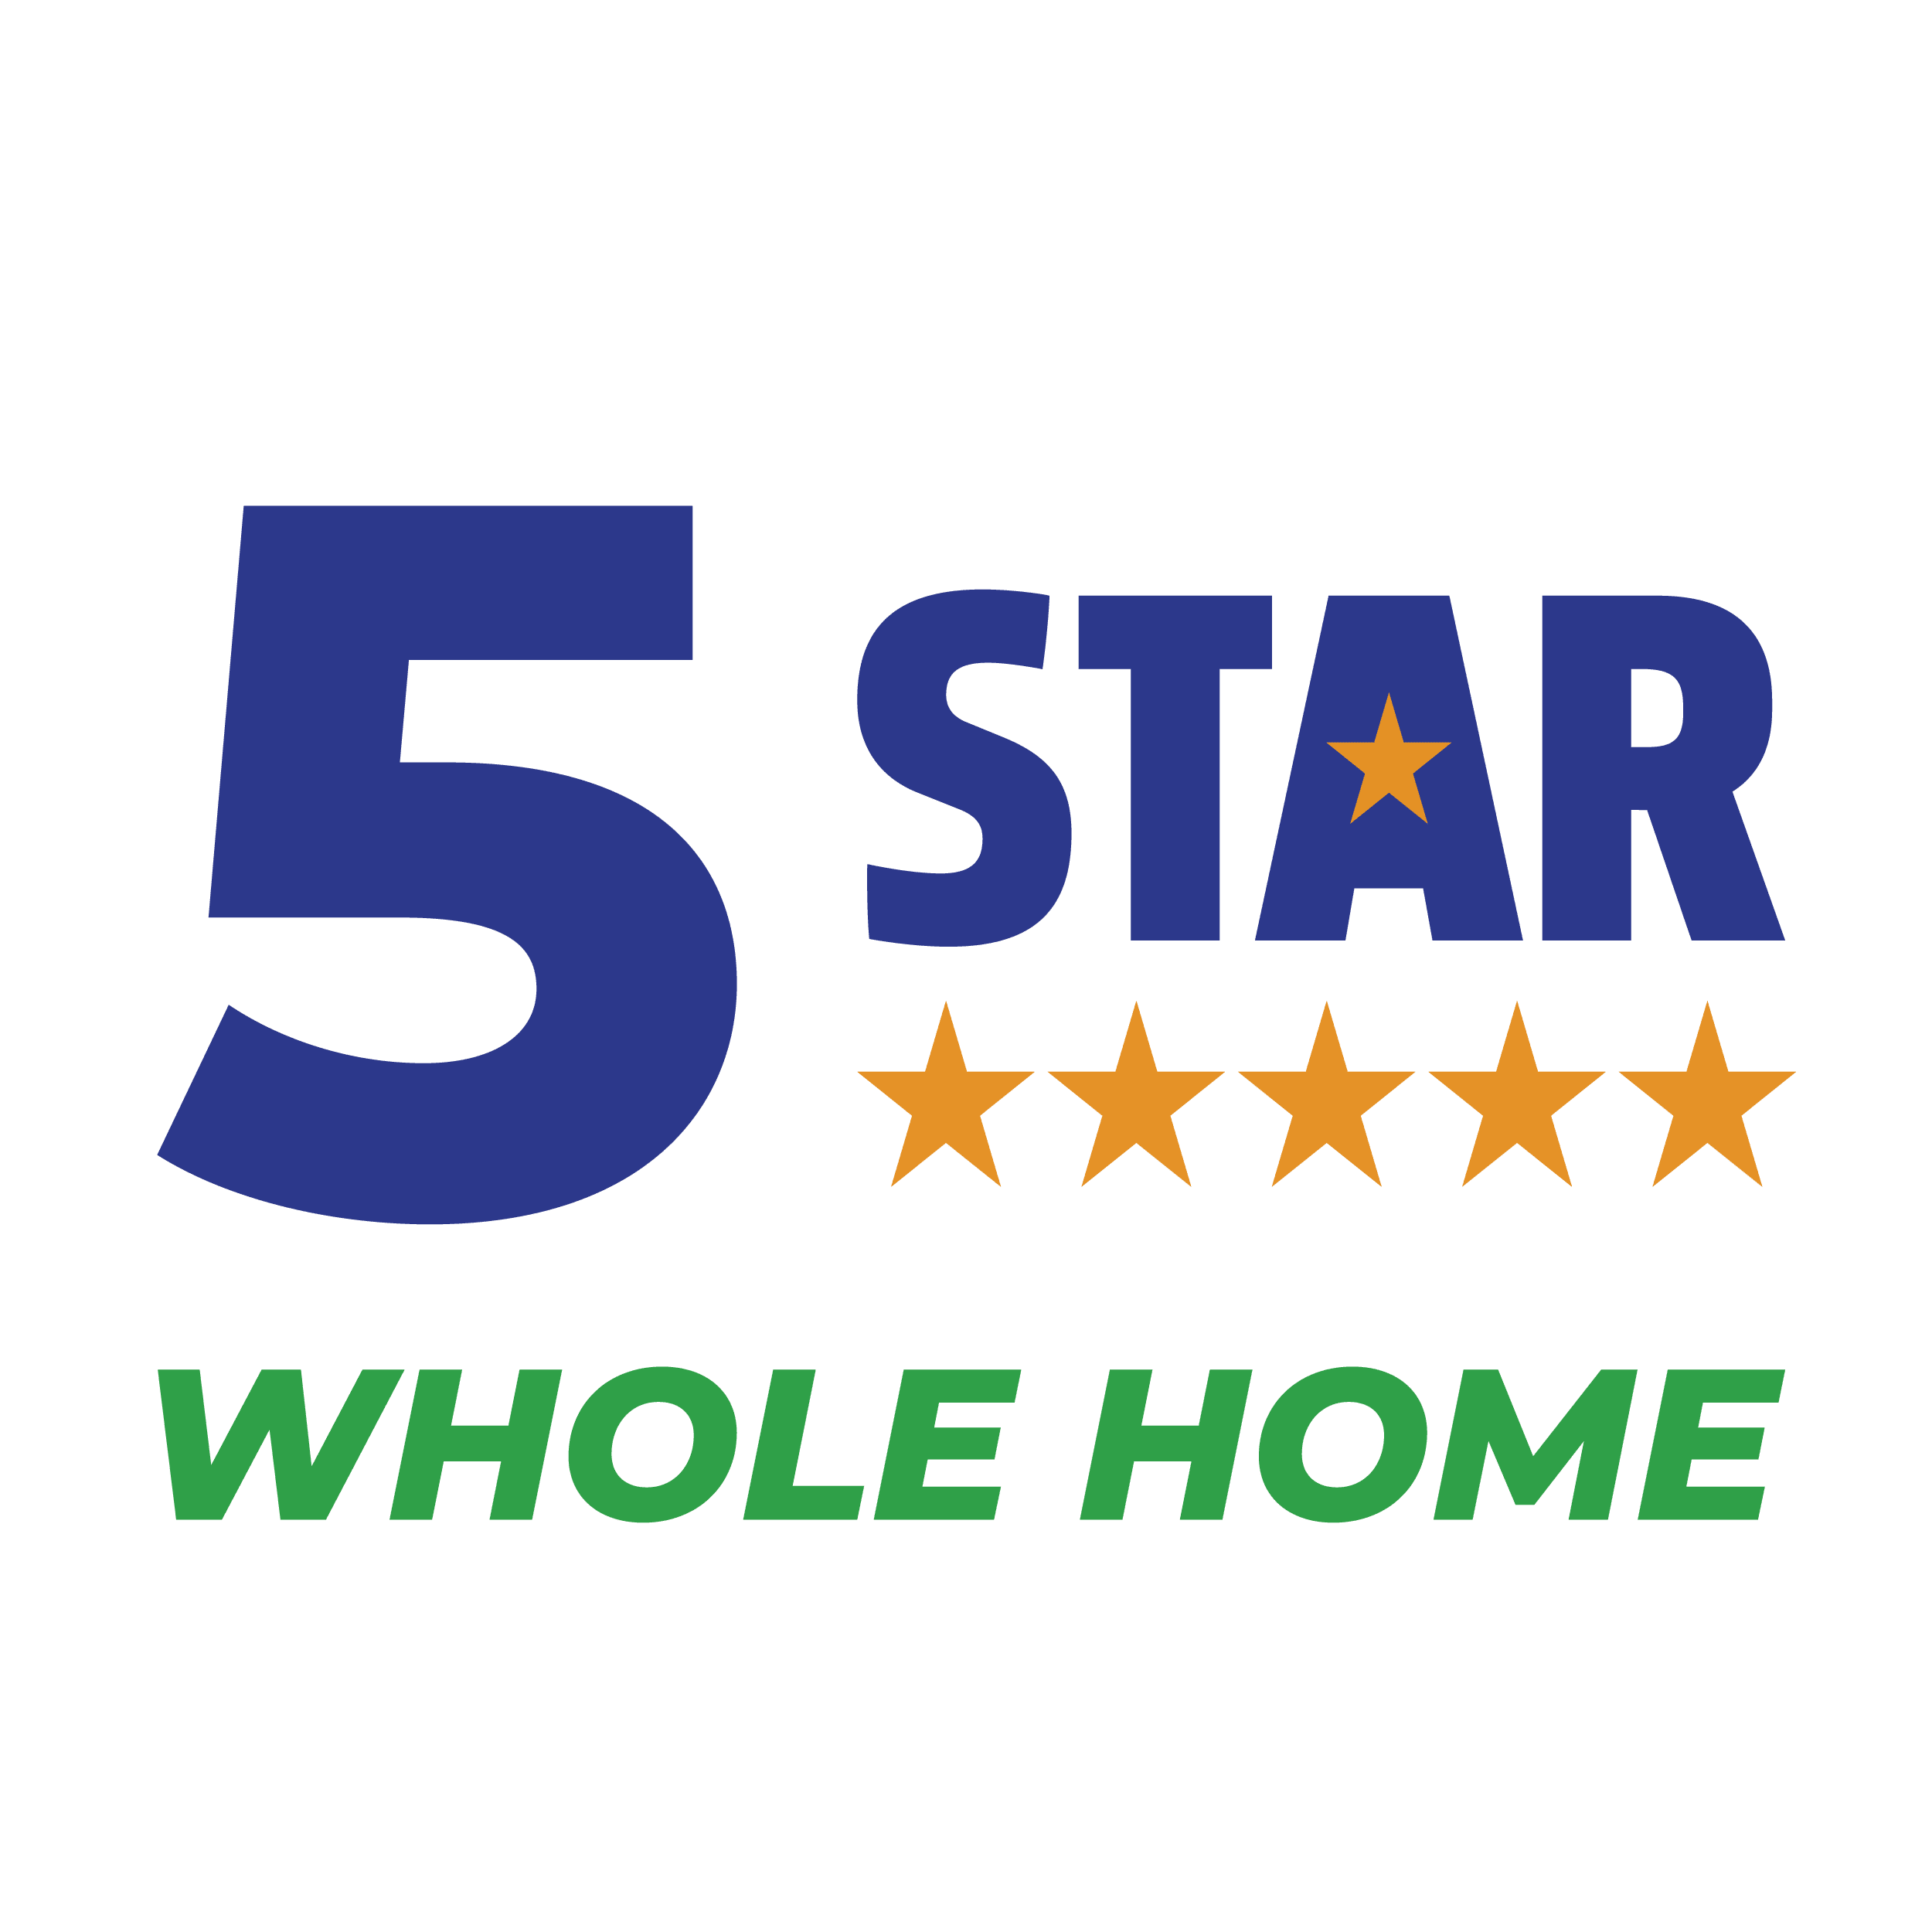 Five Star Protect Plans